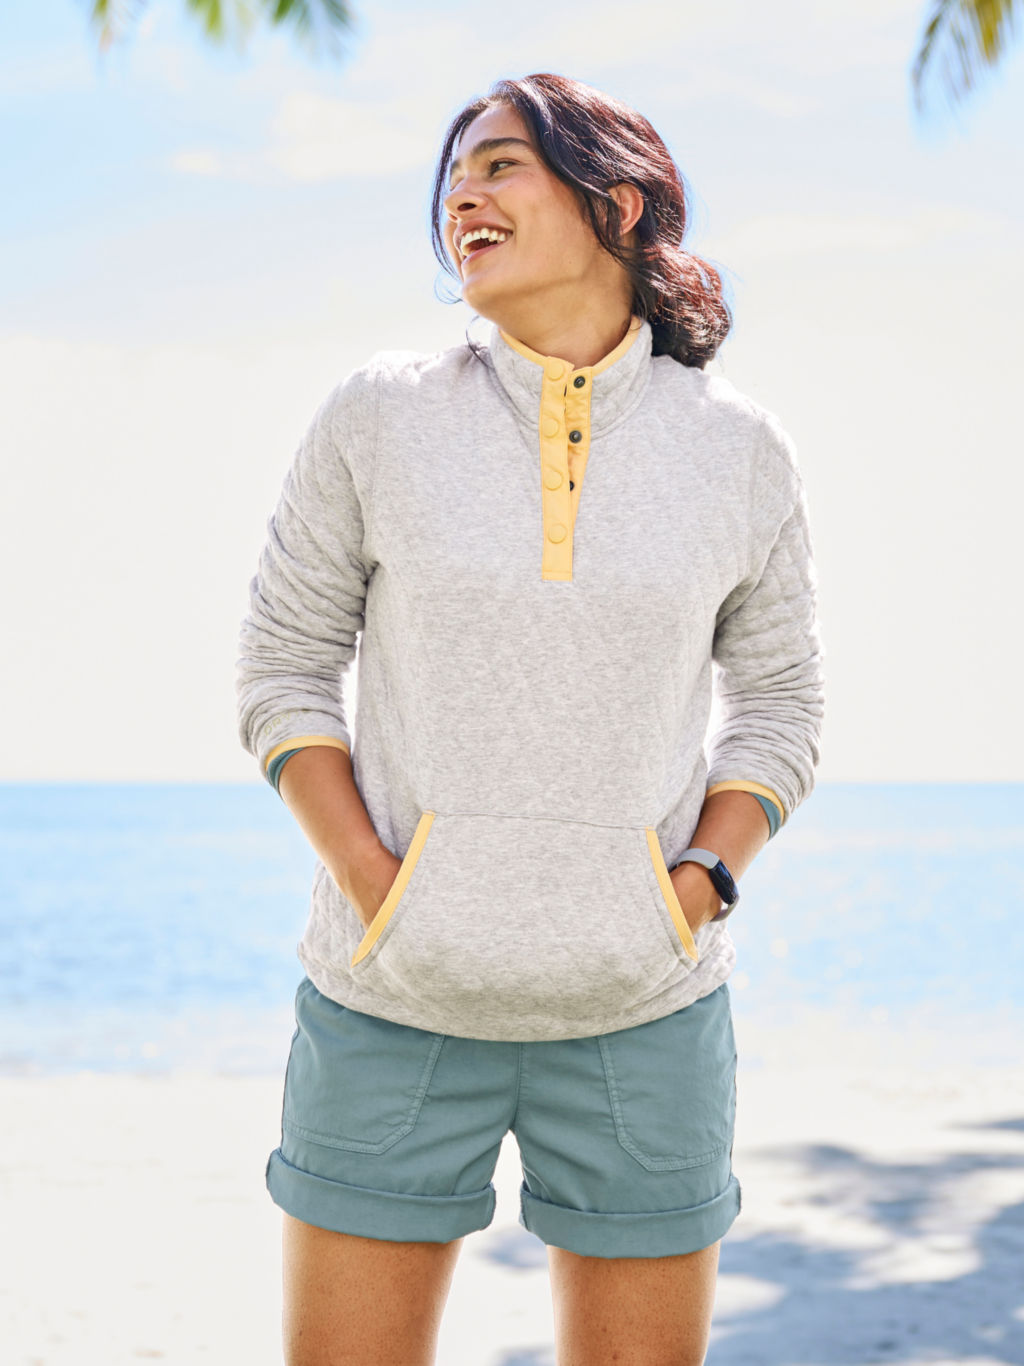 A woman wearing a light gray quilted sweatshirt and sunwashed teal shorts.